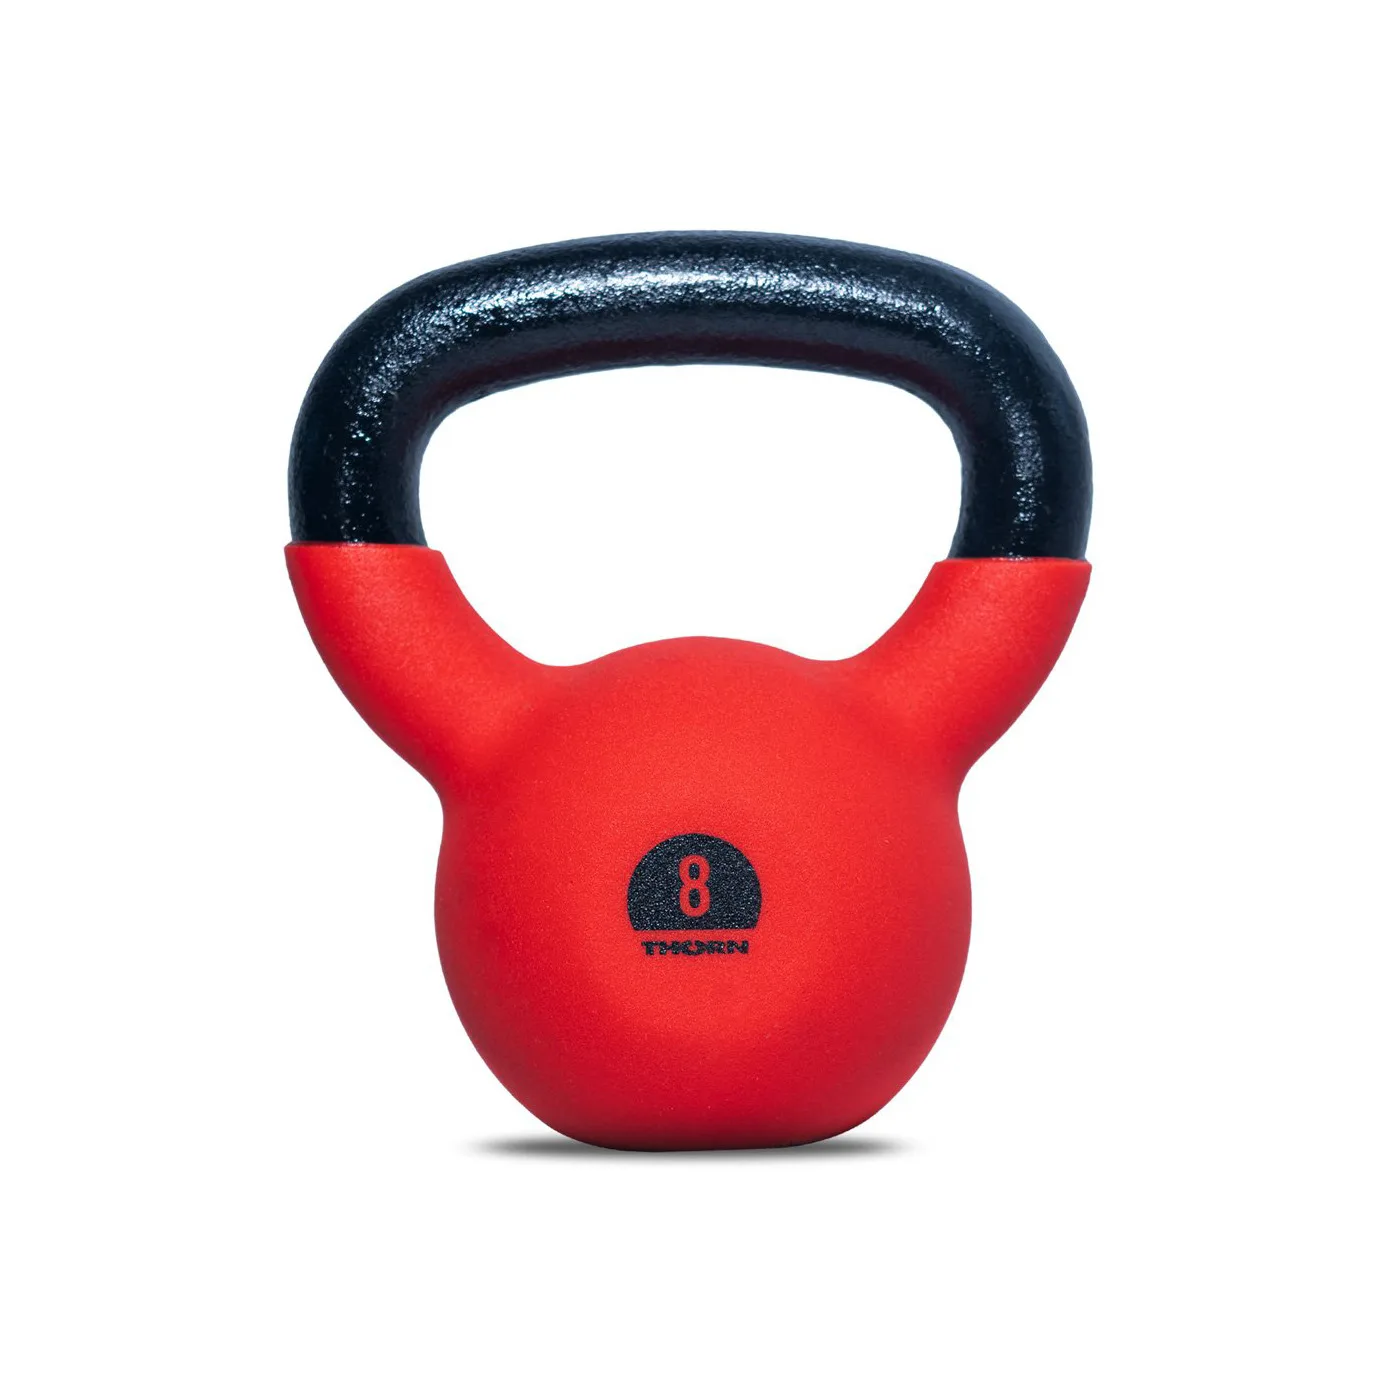 Cast-iron kettlebell with rubber protective coating 8kg